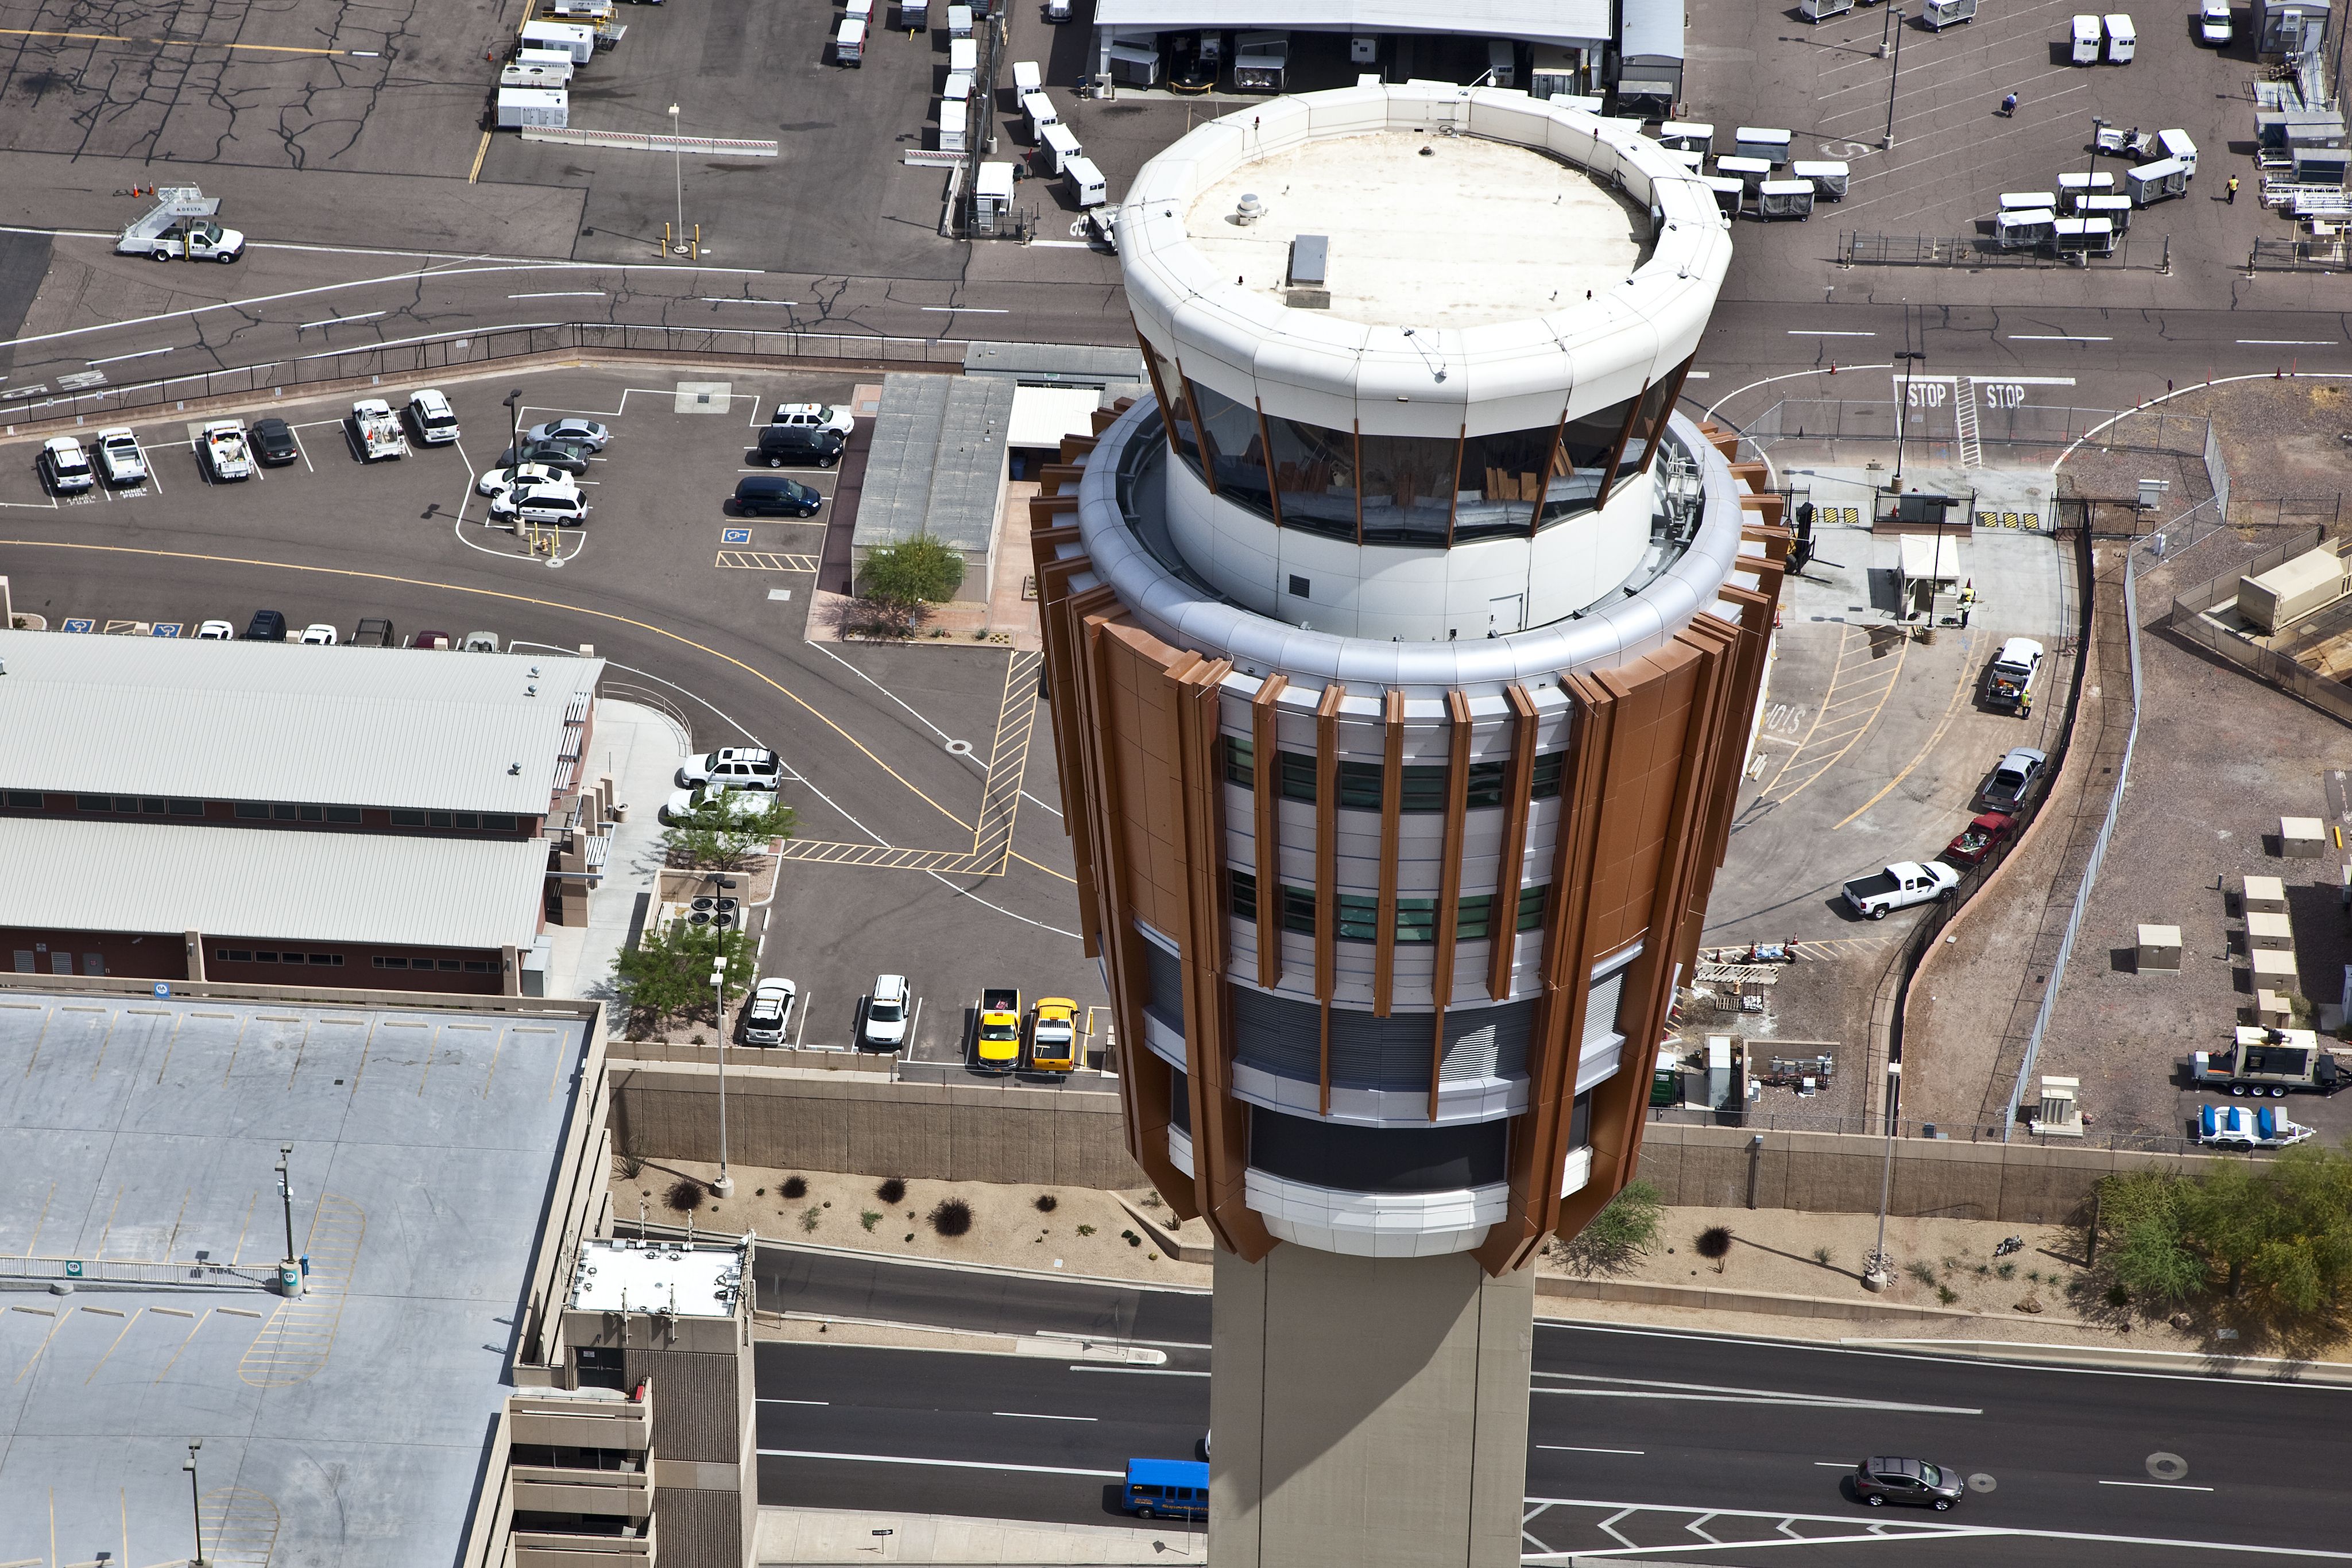 A closeup of the Air Traffic Control tower at Pheonix Sky Harbor International Airport.